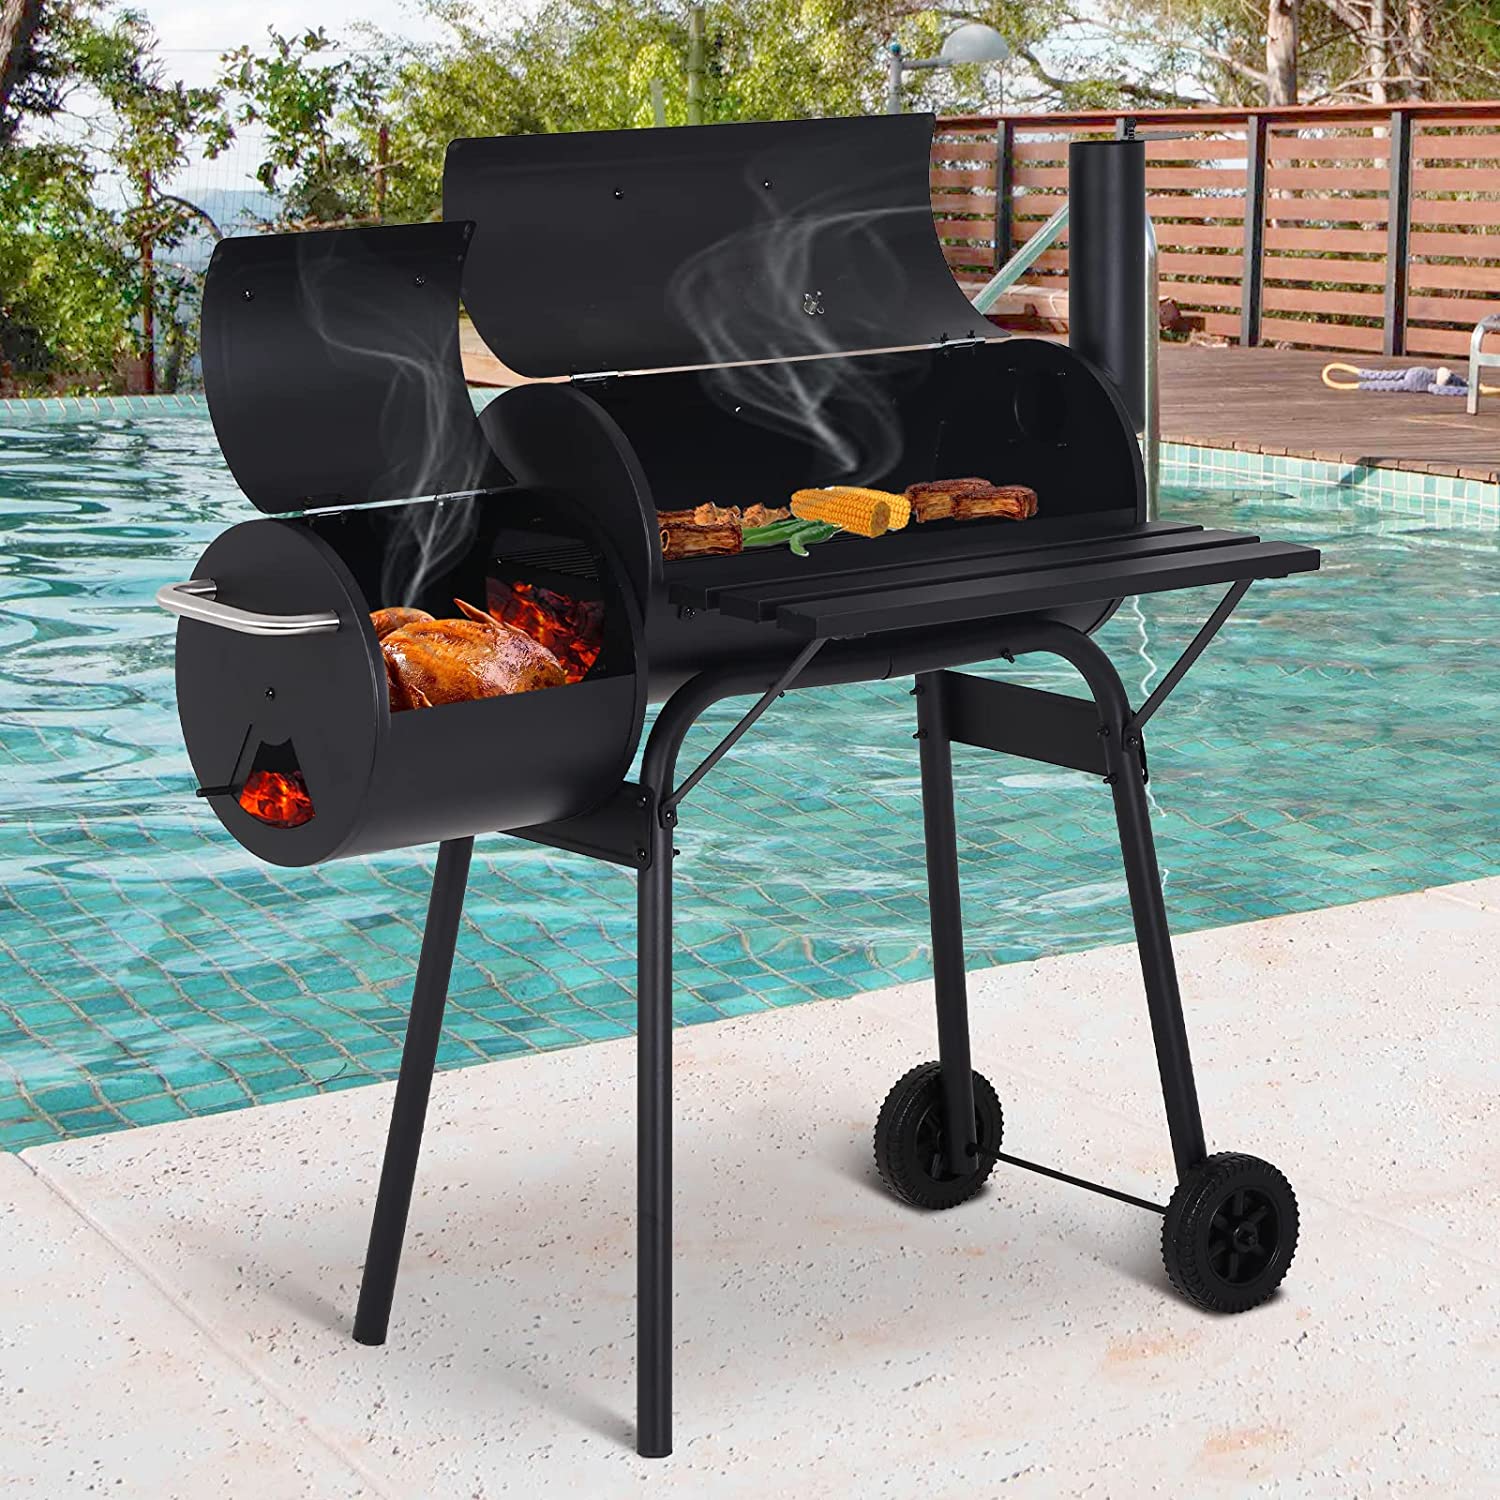 NiamVelo BBQ Charcoal Grills Outdoor BBQ Grill Camping Grill, Stainless Steel Grill Offset Smoker with Cover, Portable BBQ Barbecue Grill for Picnic Camping Party, Black - image 4 of 7